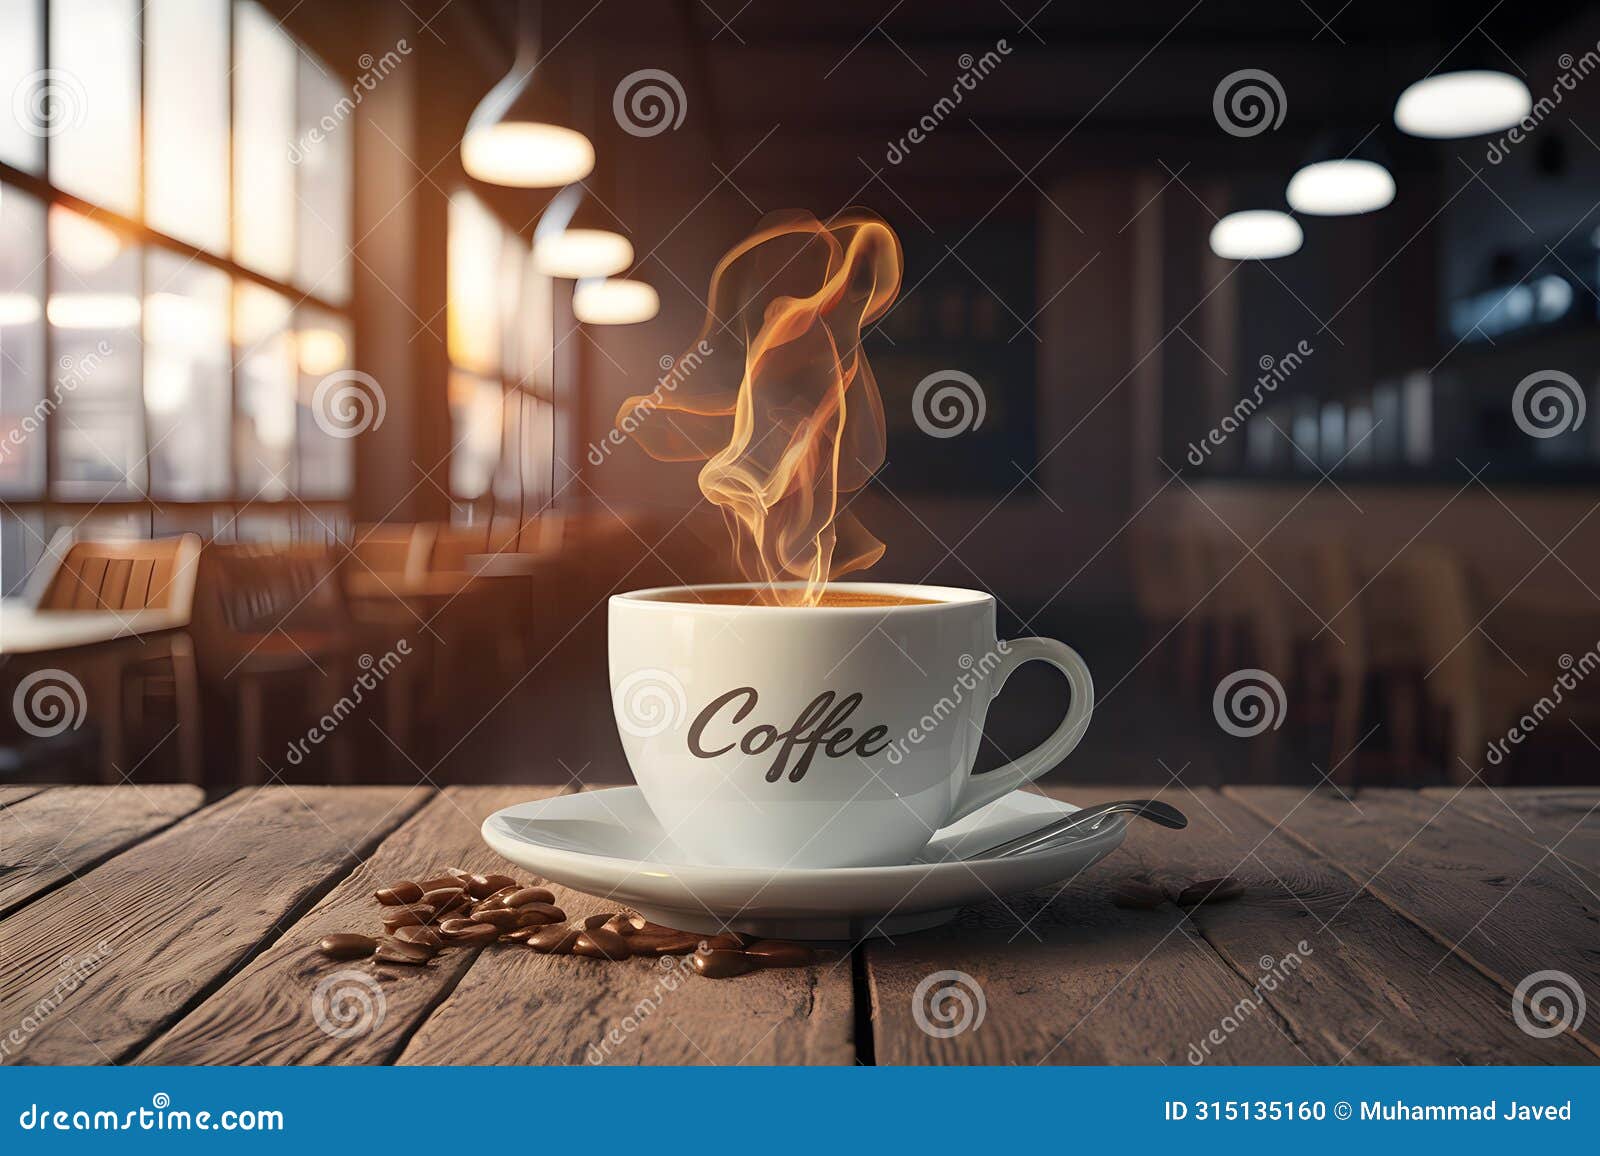 cafe ambiance blank white coffee cup mockup with caf?? background